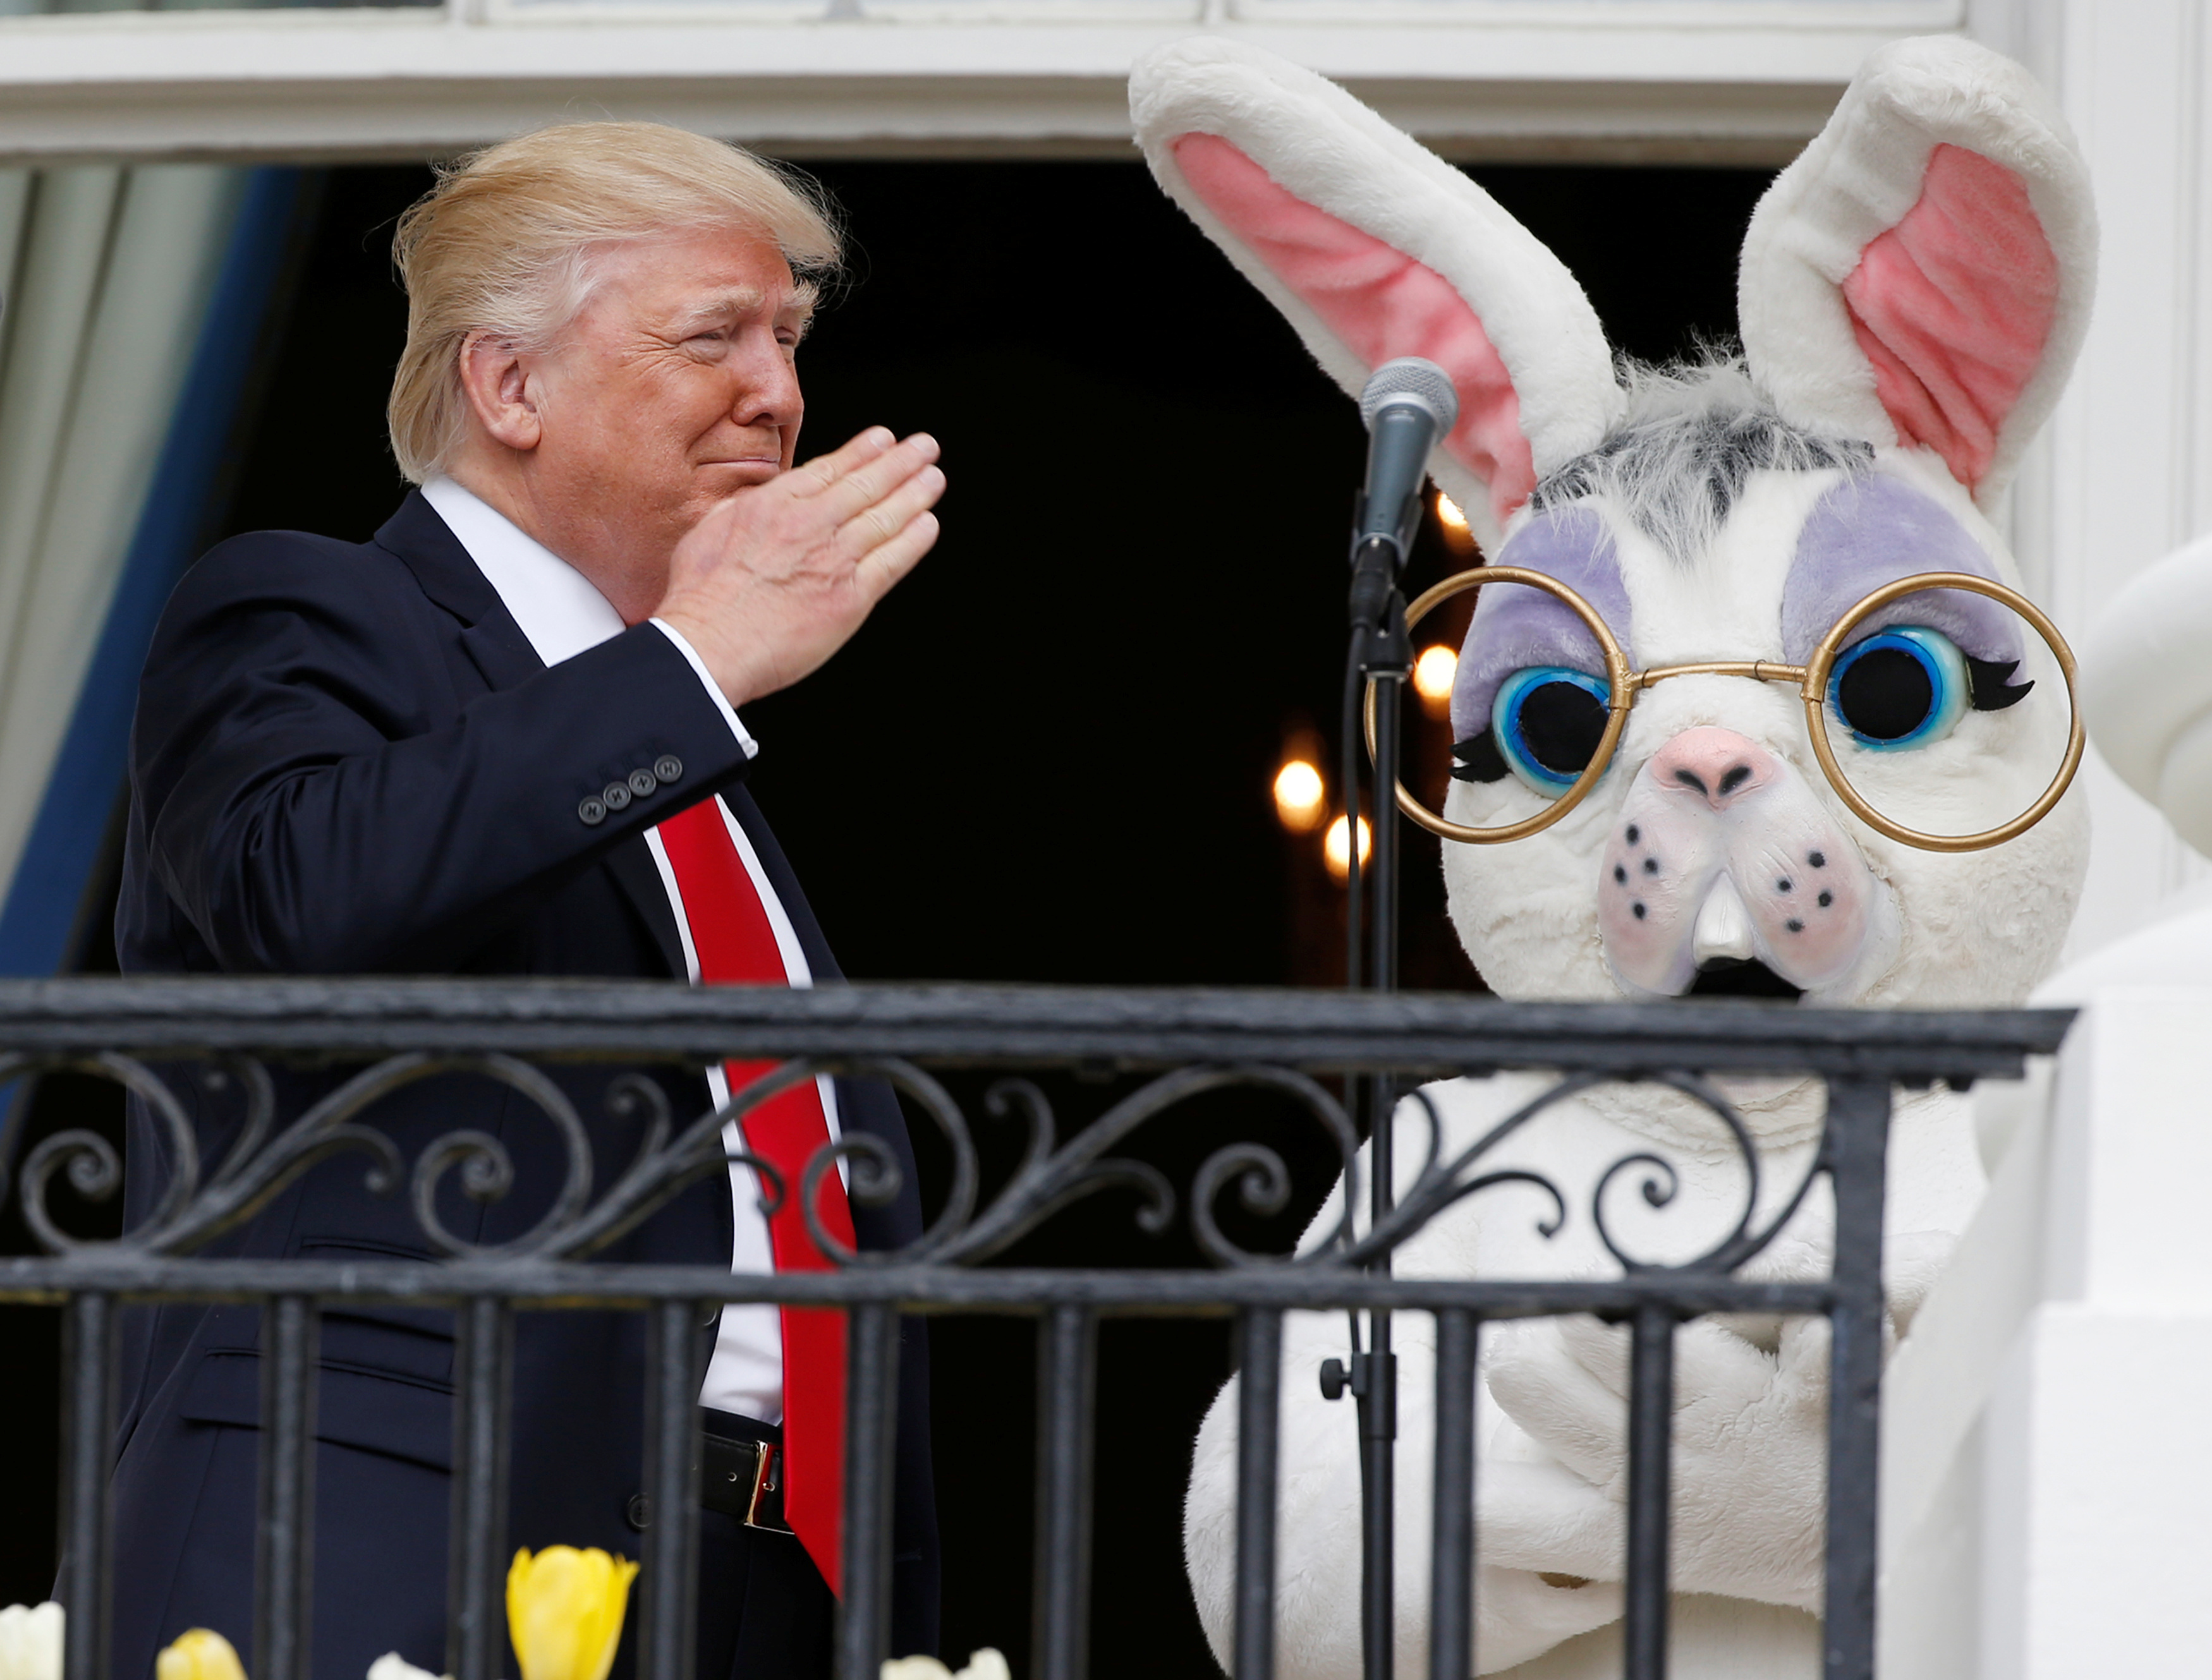 WASHINGTON 2017-04-17 U.S. President Donald Trump salutes a member of the military (not seen in photo) who had just sung the U.S. national anthem as he stands with a performer in an Easter Bunny costume at the White House Easter Egg Roll on the Truman Balcony of the White House in Washington, U.S., April 17, 2017. REUTERS/Joshua Roberts TPX IMAGES OF THE DAY Photo: / REUTERS / TT / kod 72000